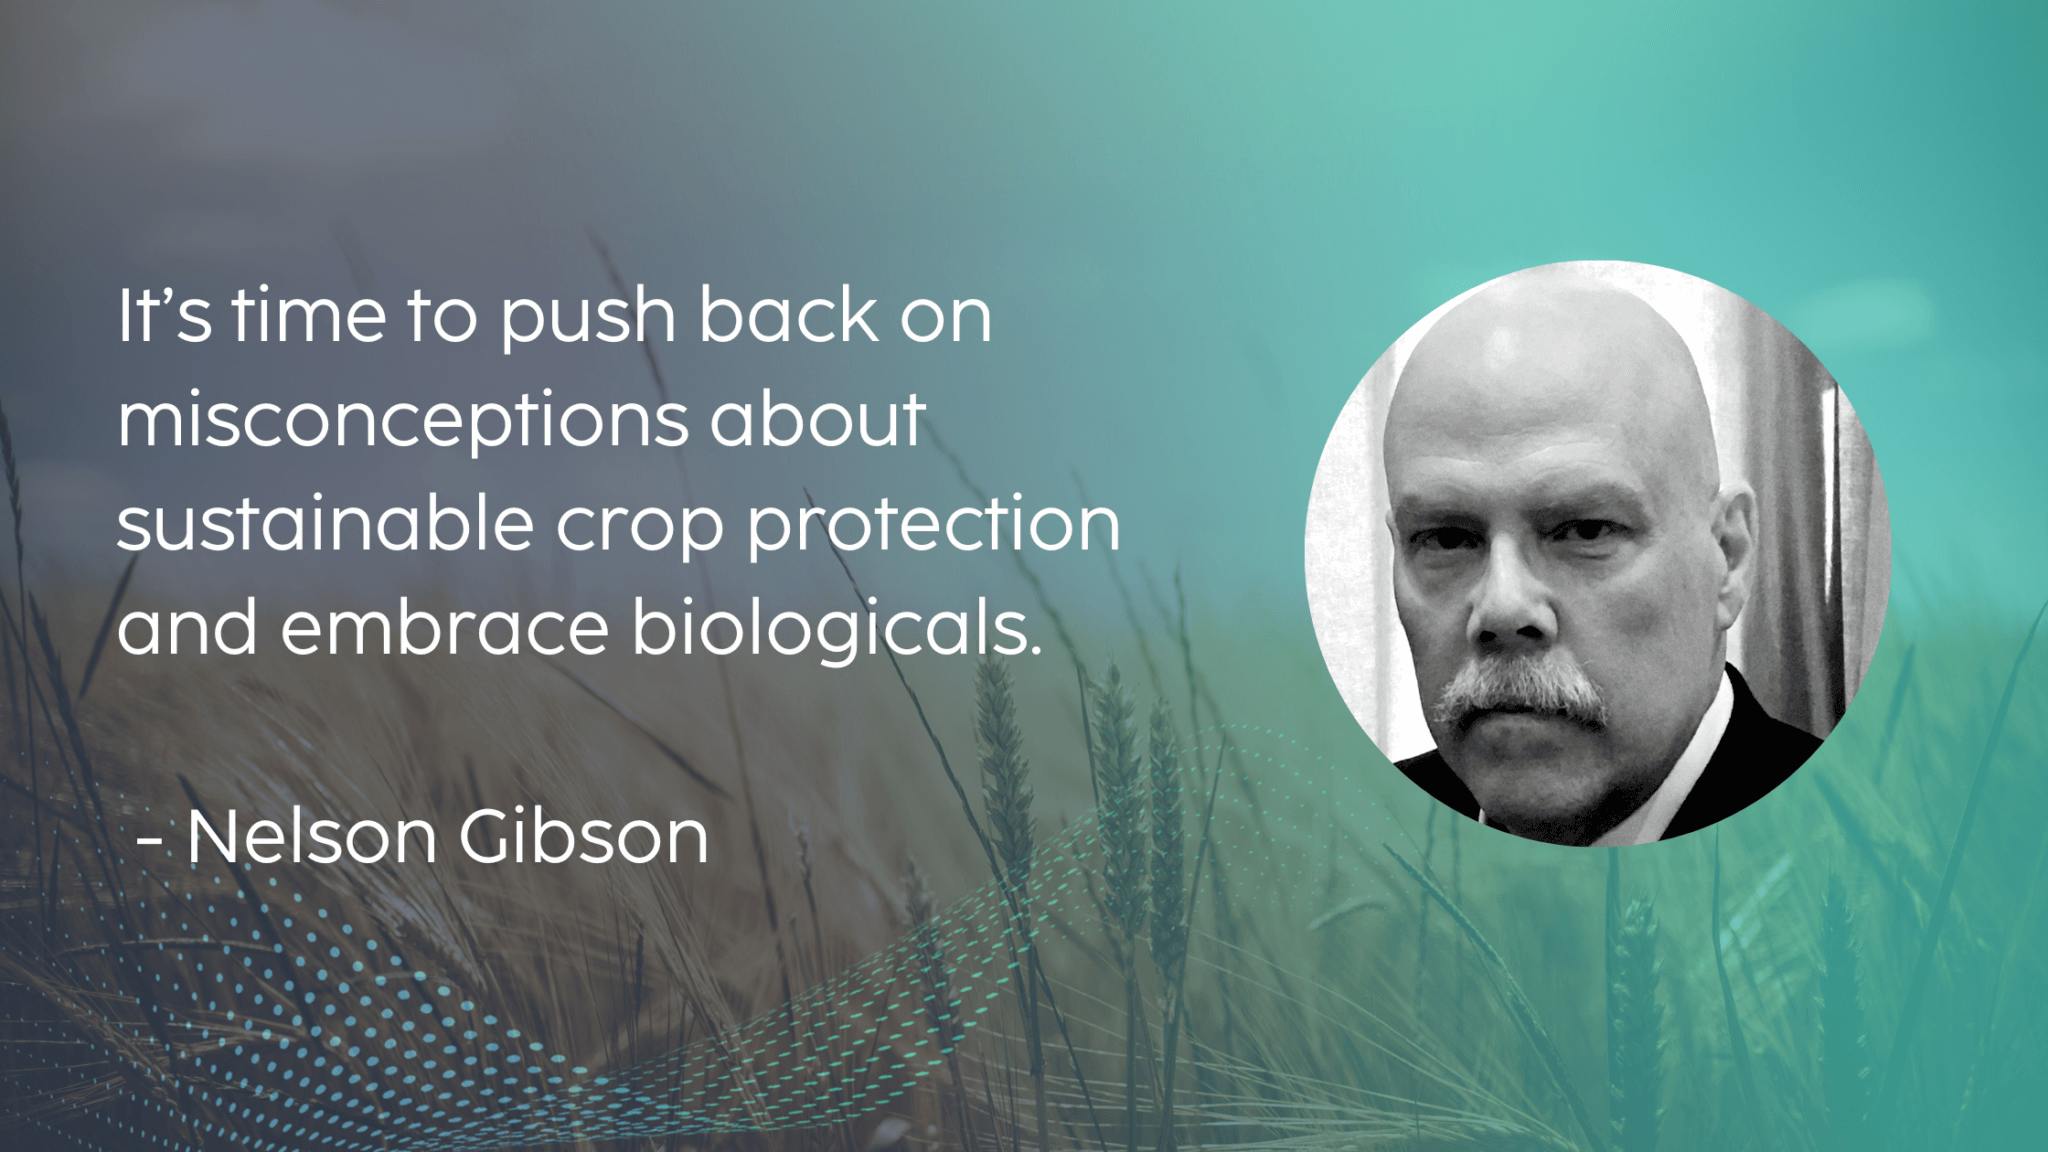 A background image of a wheat field with white text of a quote from Nelson Gibson on the left. On the right is a circular image which features a photo of Nelson Gibson.